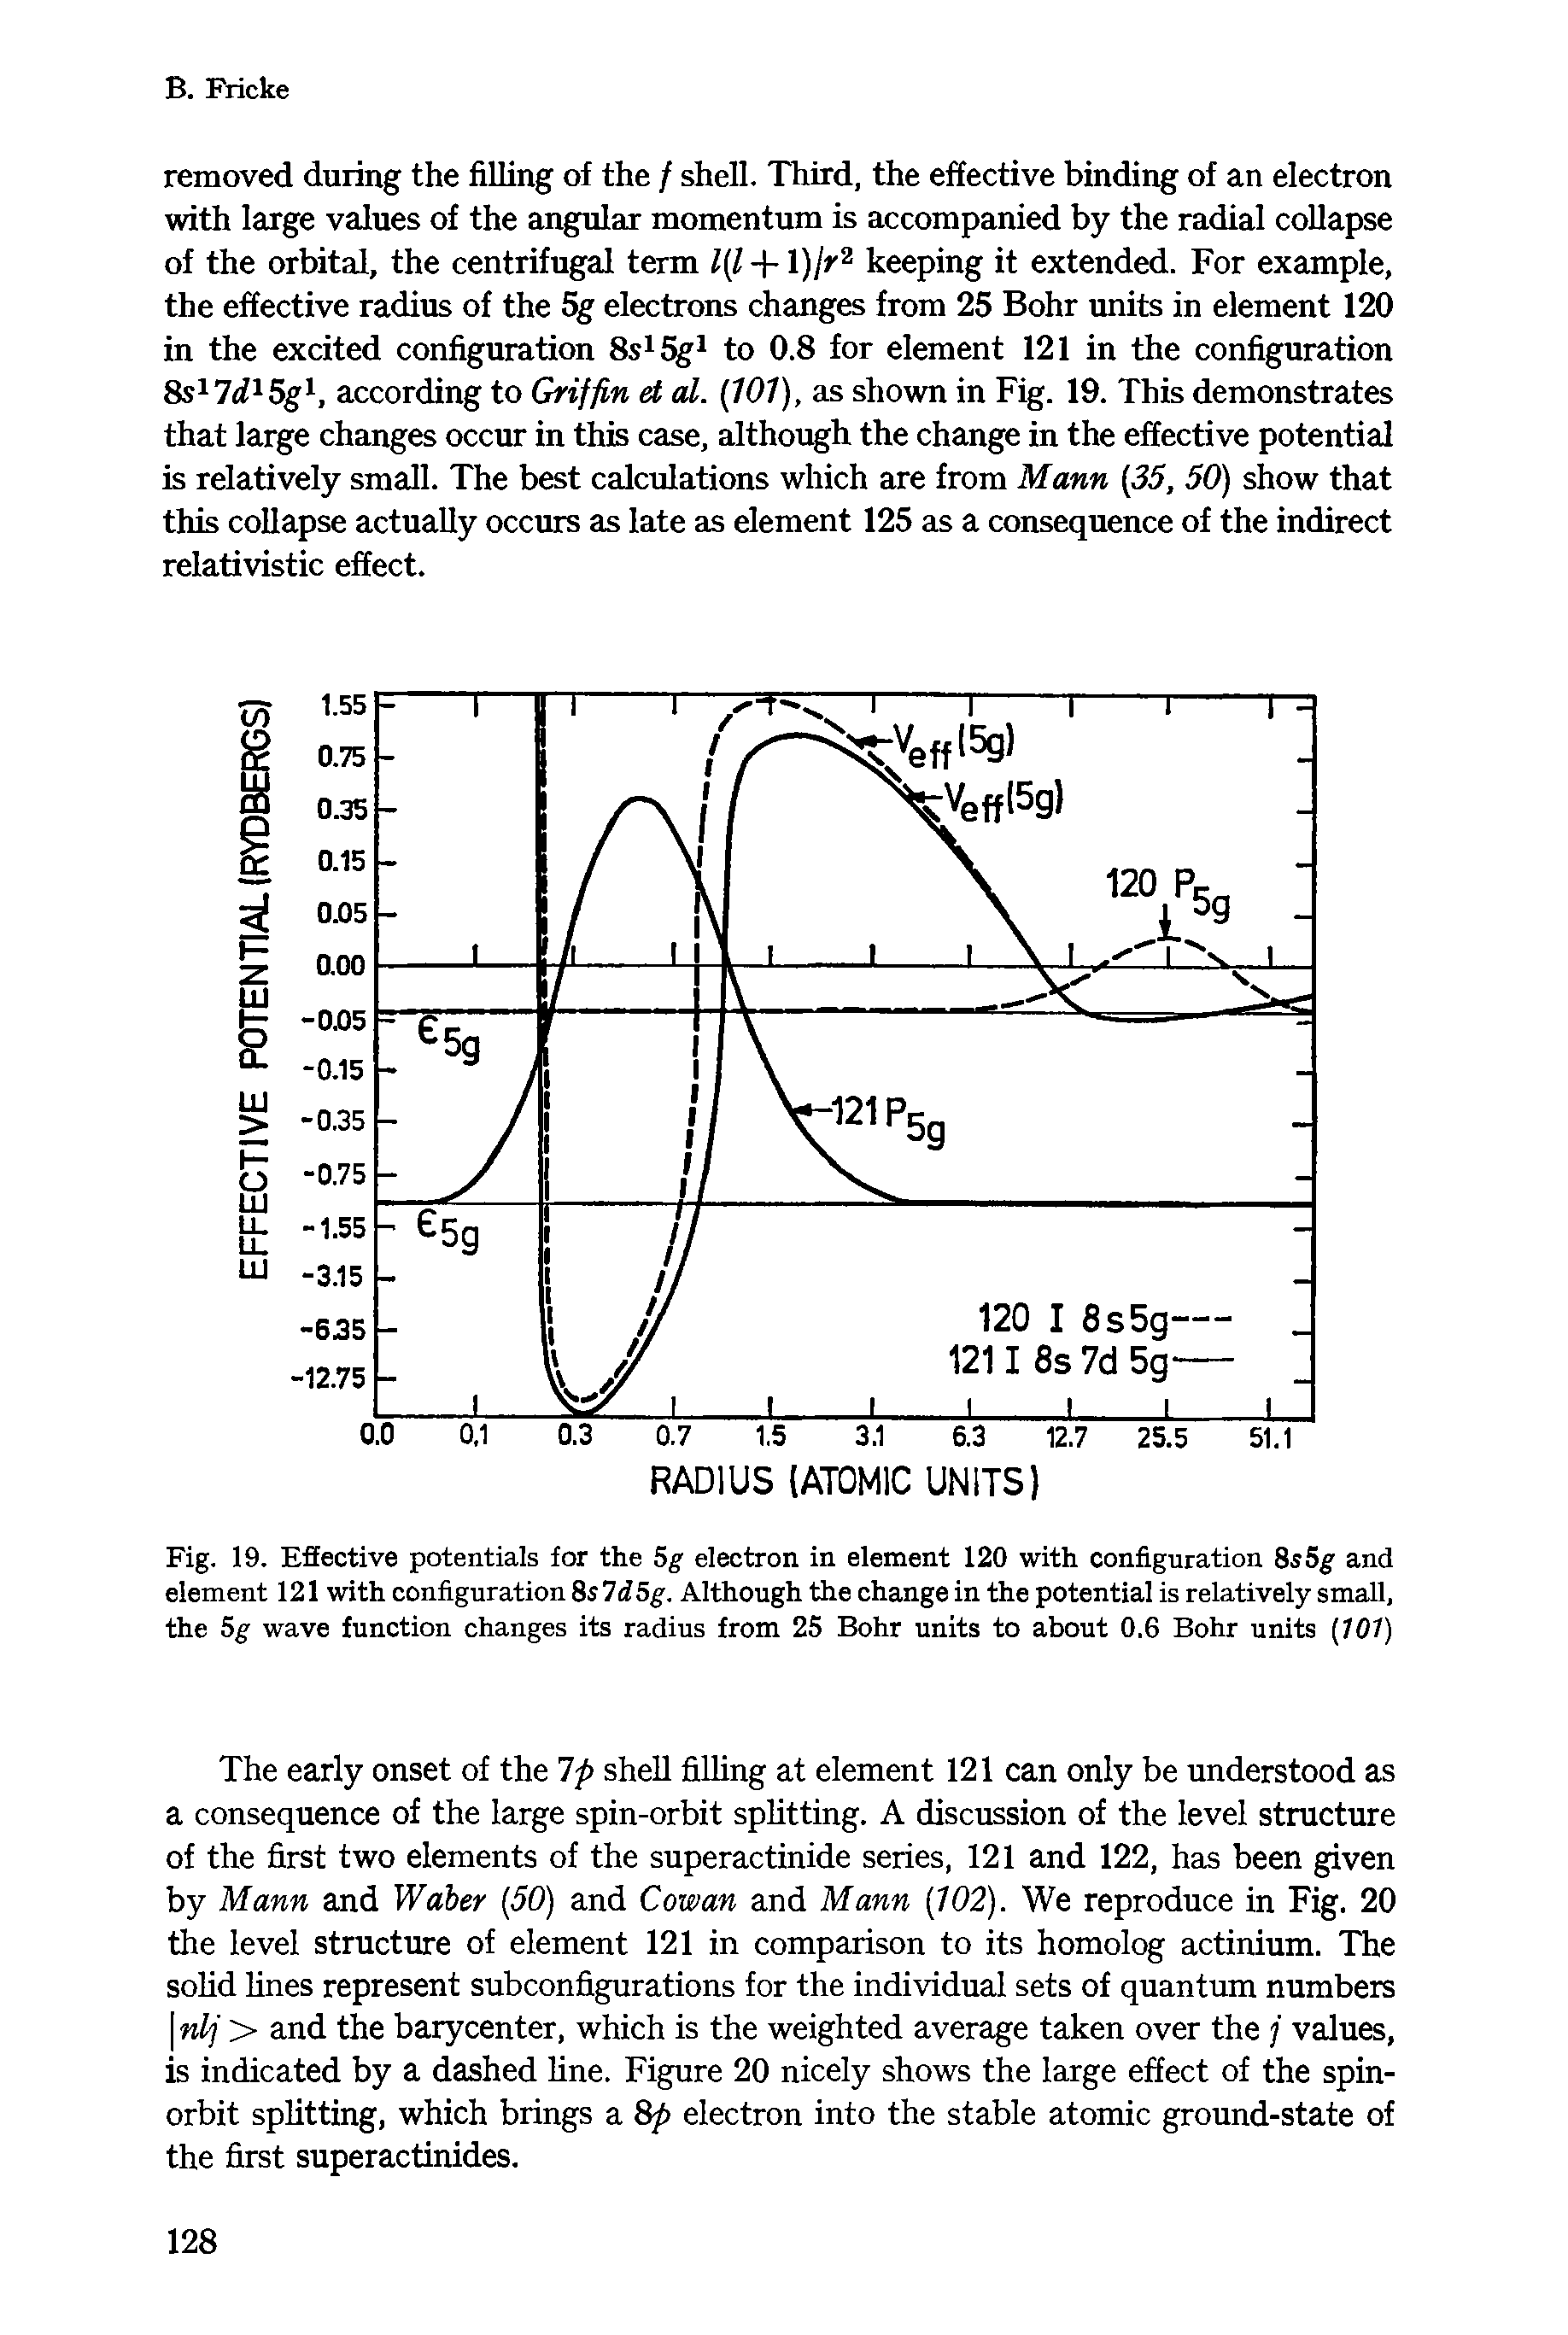 Fig. 19. Efiective potentials for the Sg electron in element 120 with configuration 8sSg and element 121 with configuration SsTdSg. Although the change in the potential is relatively small, the 5g wave function changes its radius from 25 Bohr units to about 0.6 Bohr units [101]...